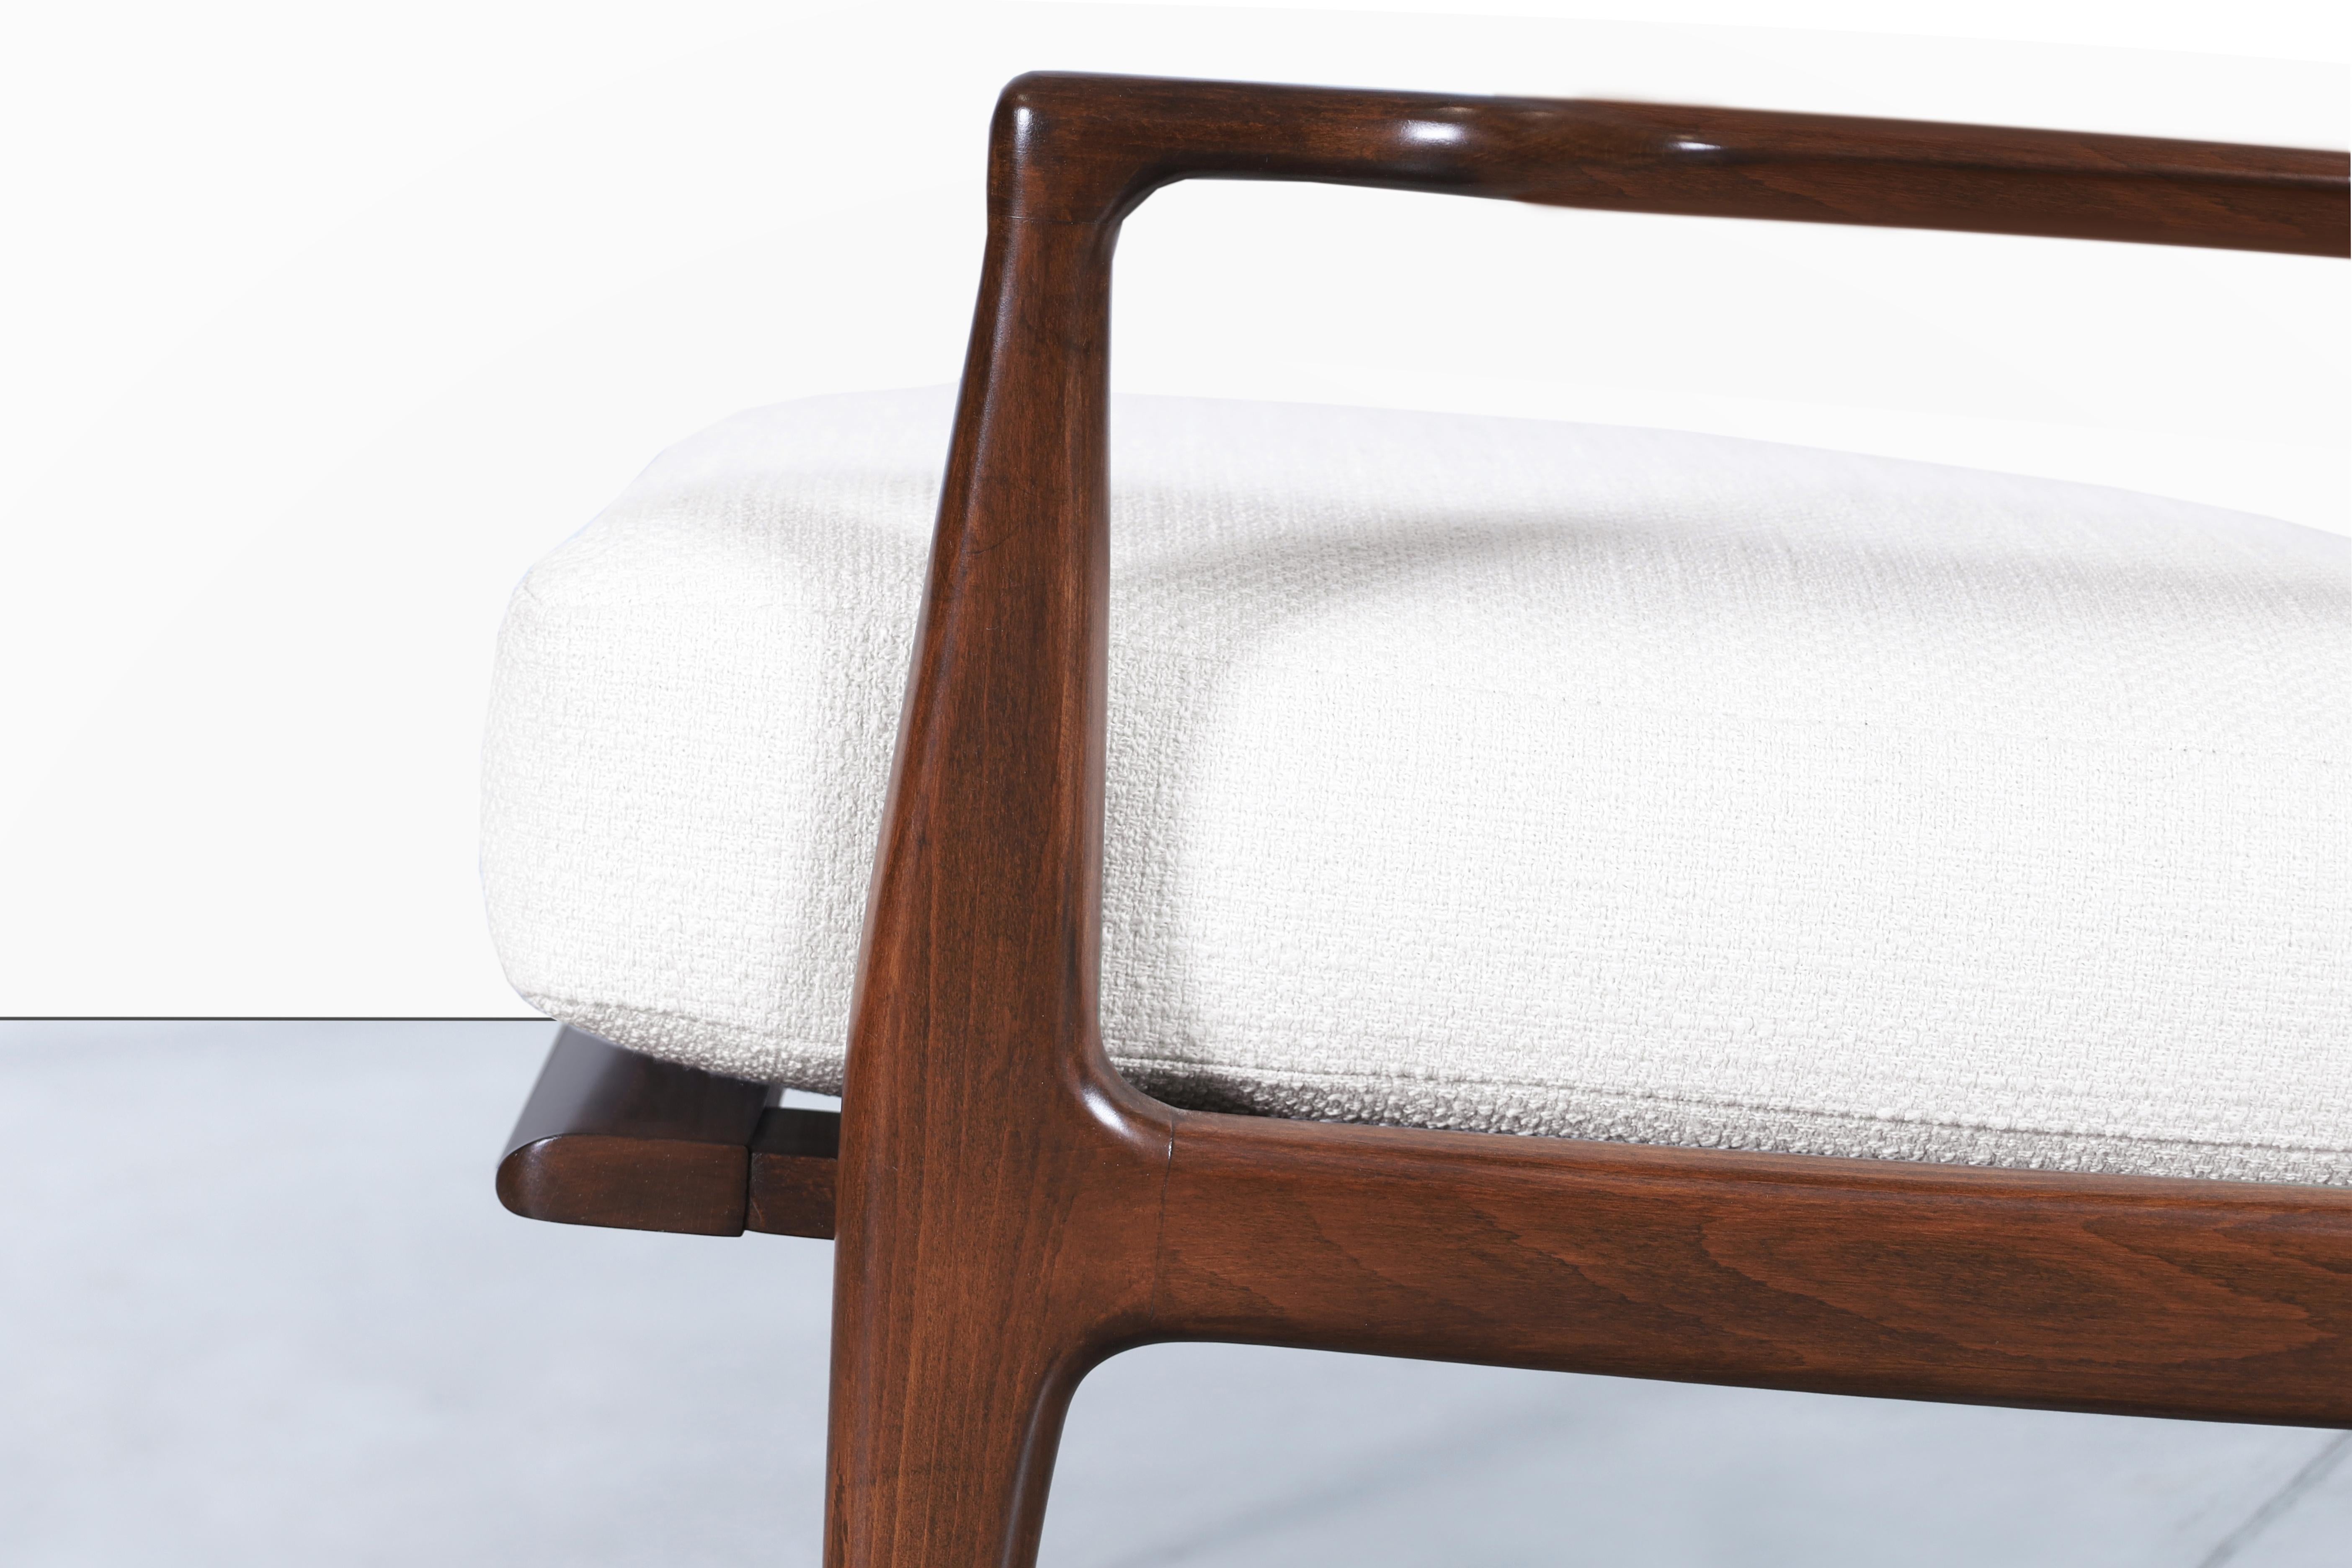 Mid-20th Century Danish Modern Walnut Lounge Chair by Ib Kofod Larsen for Selig For Sale